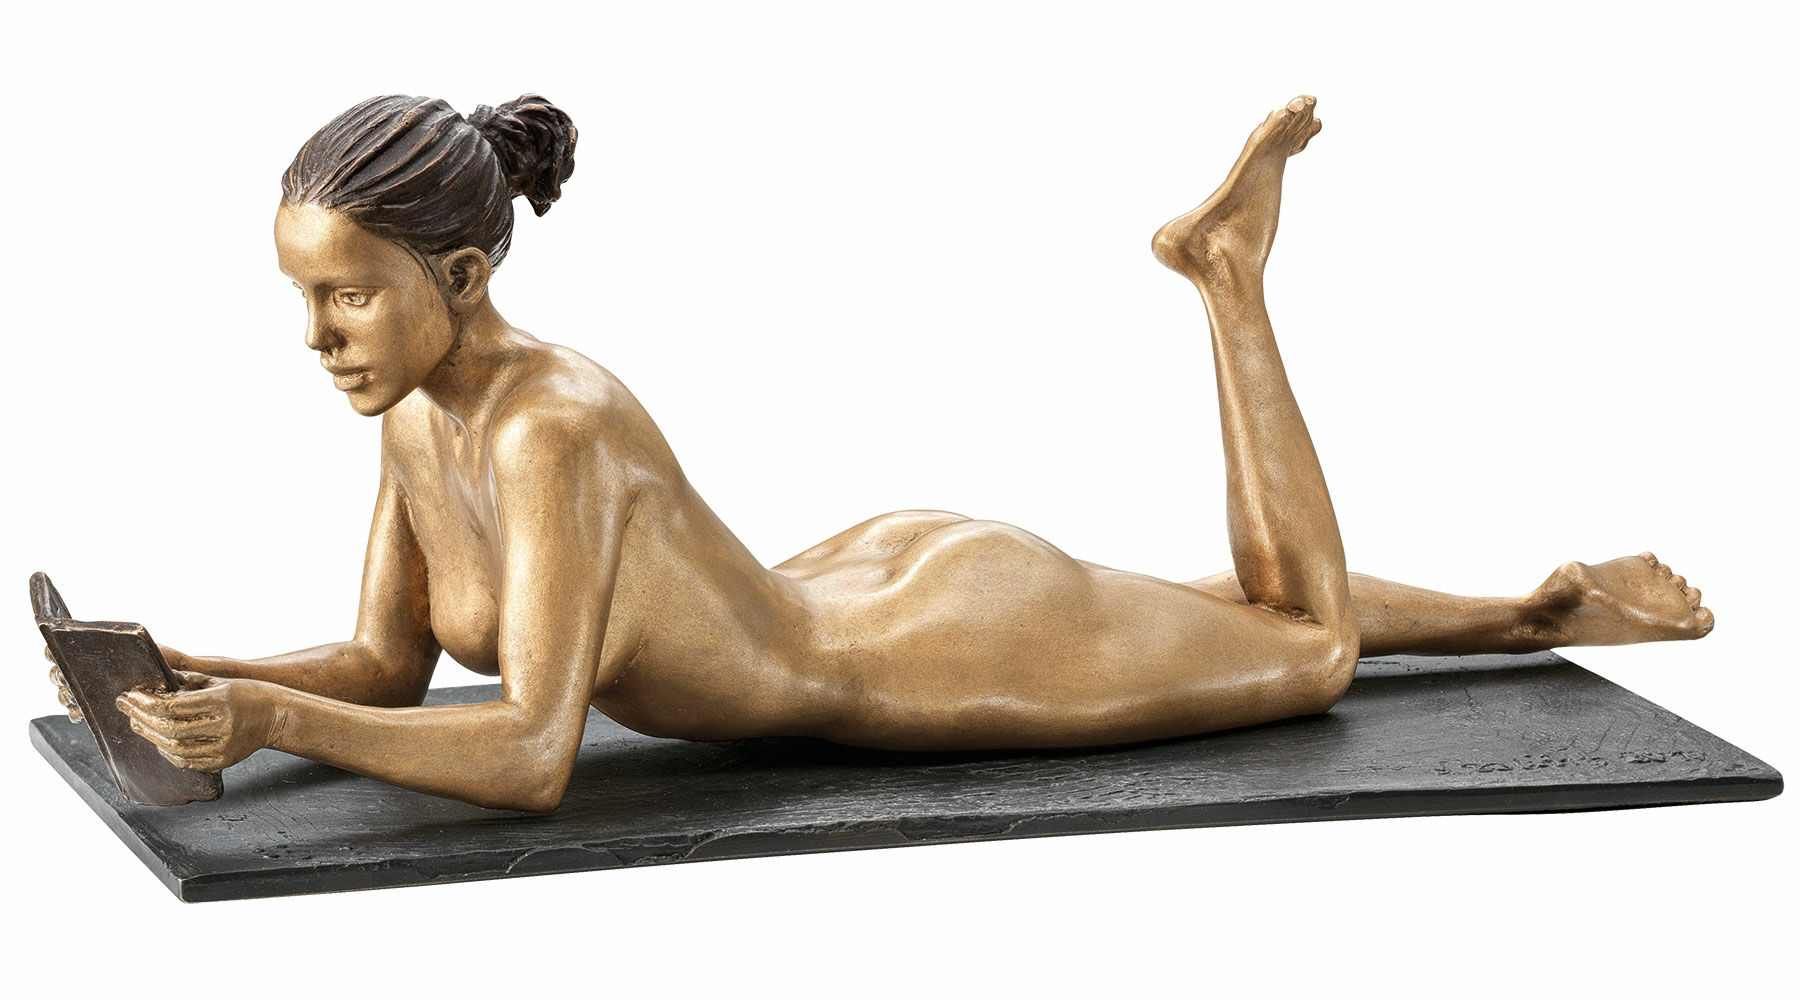 Sculpture "Reading Woman" (2019), bronze by Leo Wirth